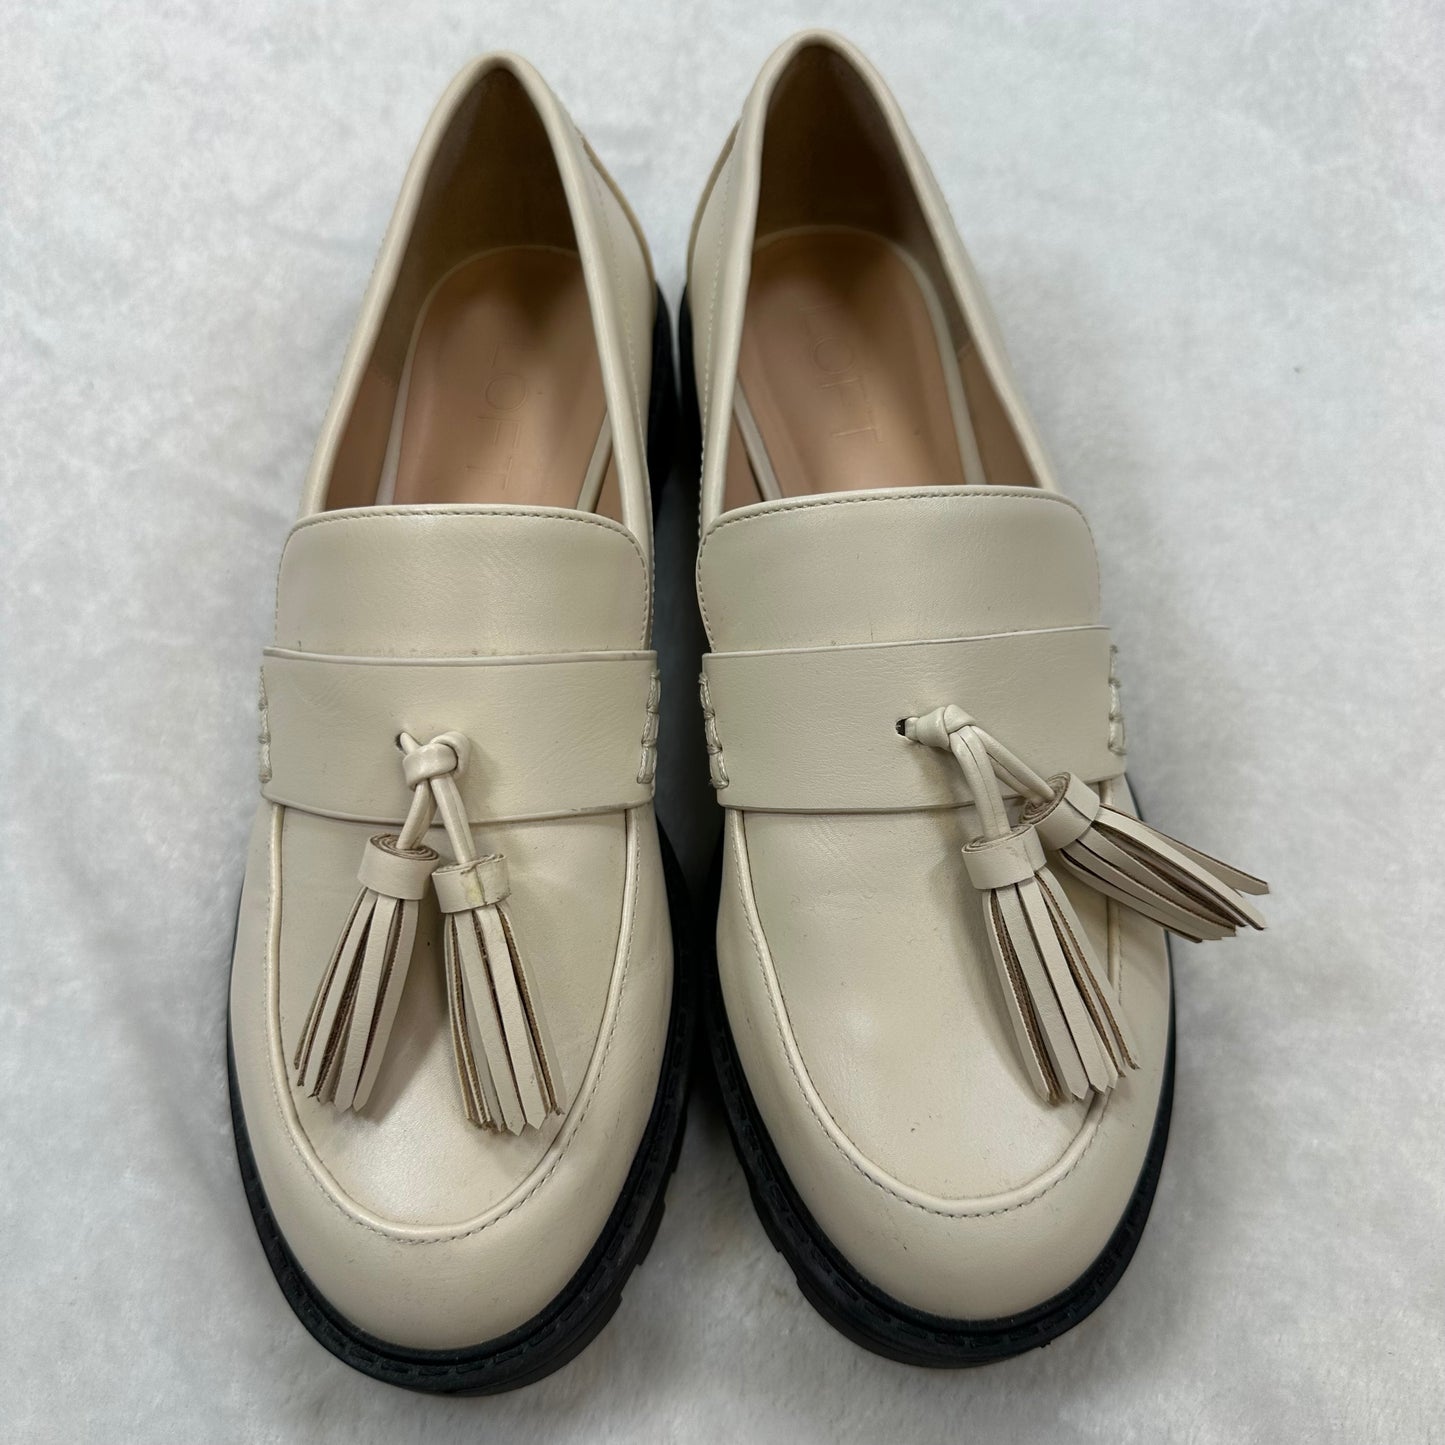 Shoes Flats Loafer Oxford By Loft O  Size: 6.5